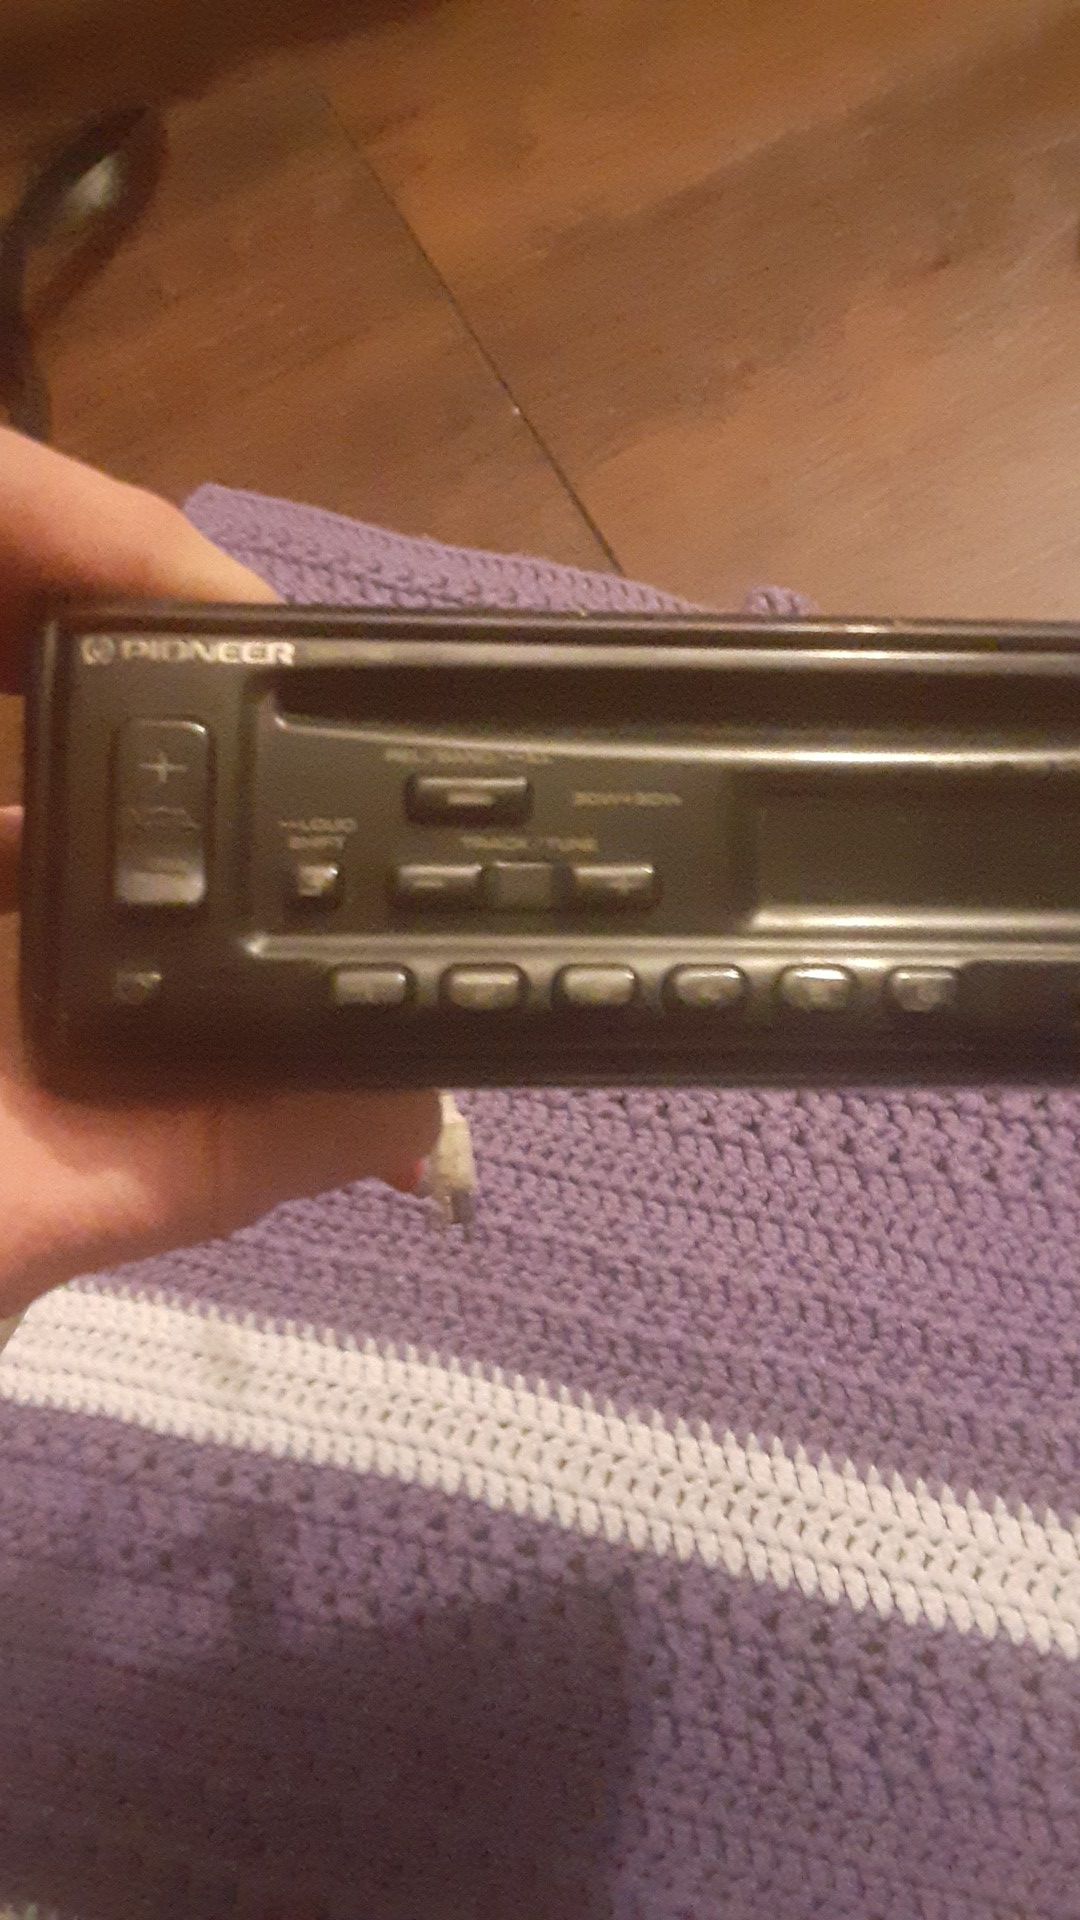 Pioneer CD player for car